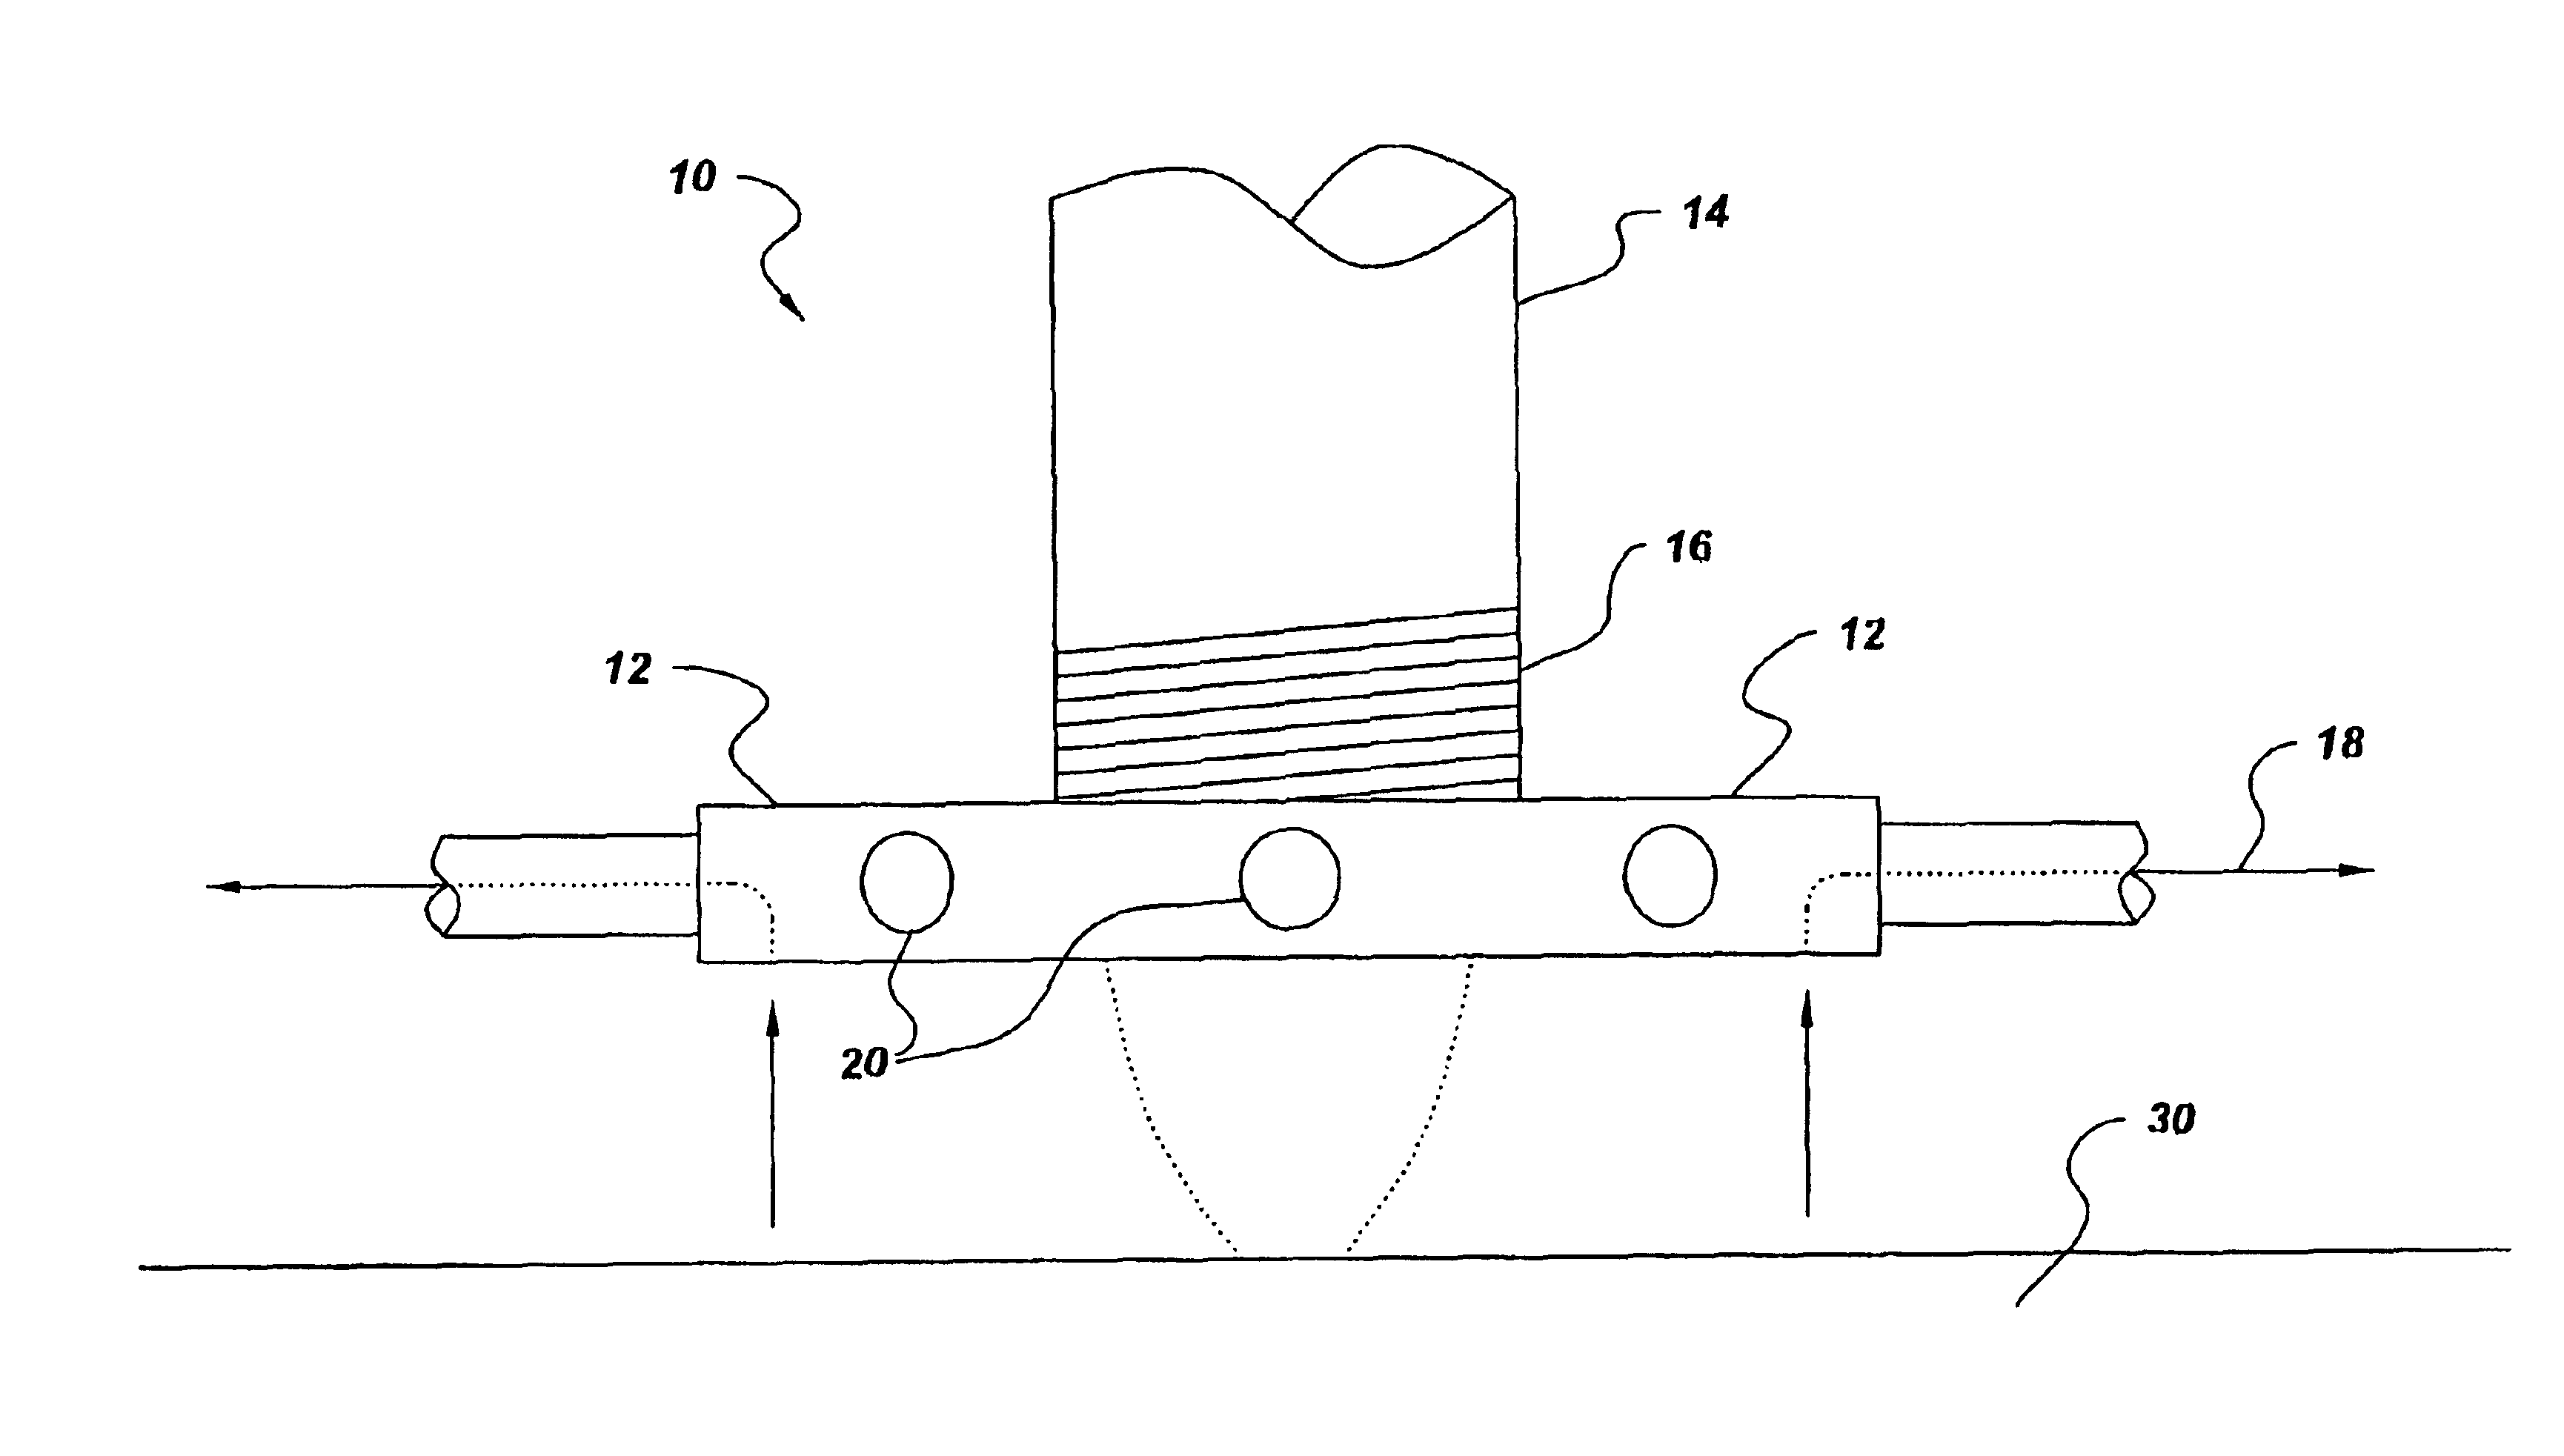 Coating apparatus and processes for forming low oxide coatings